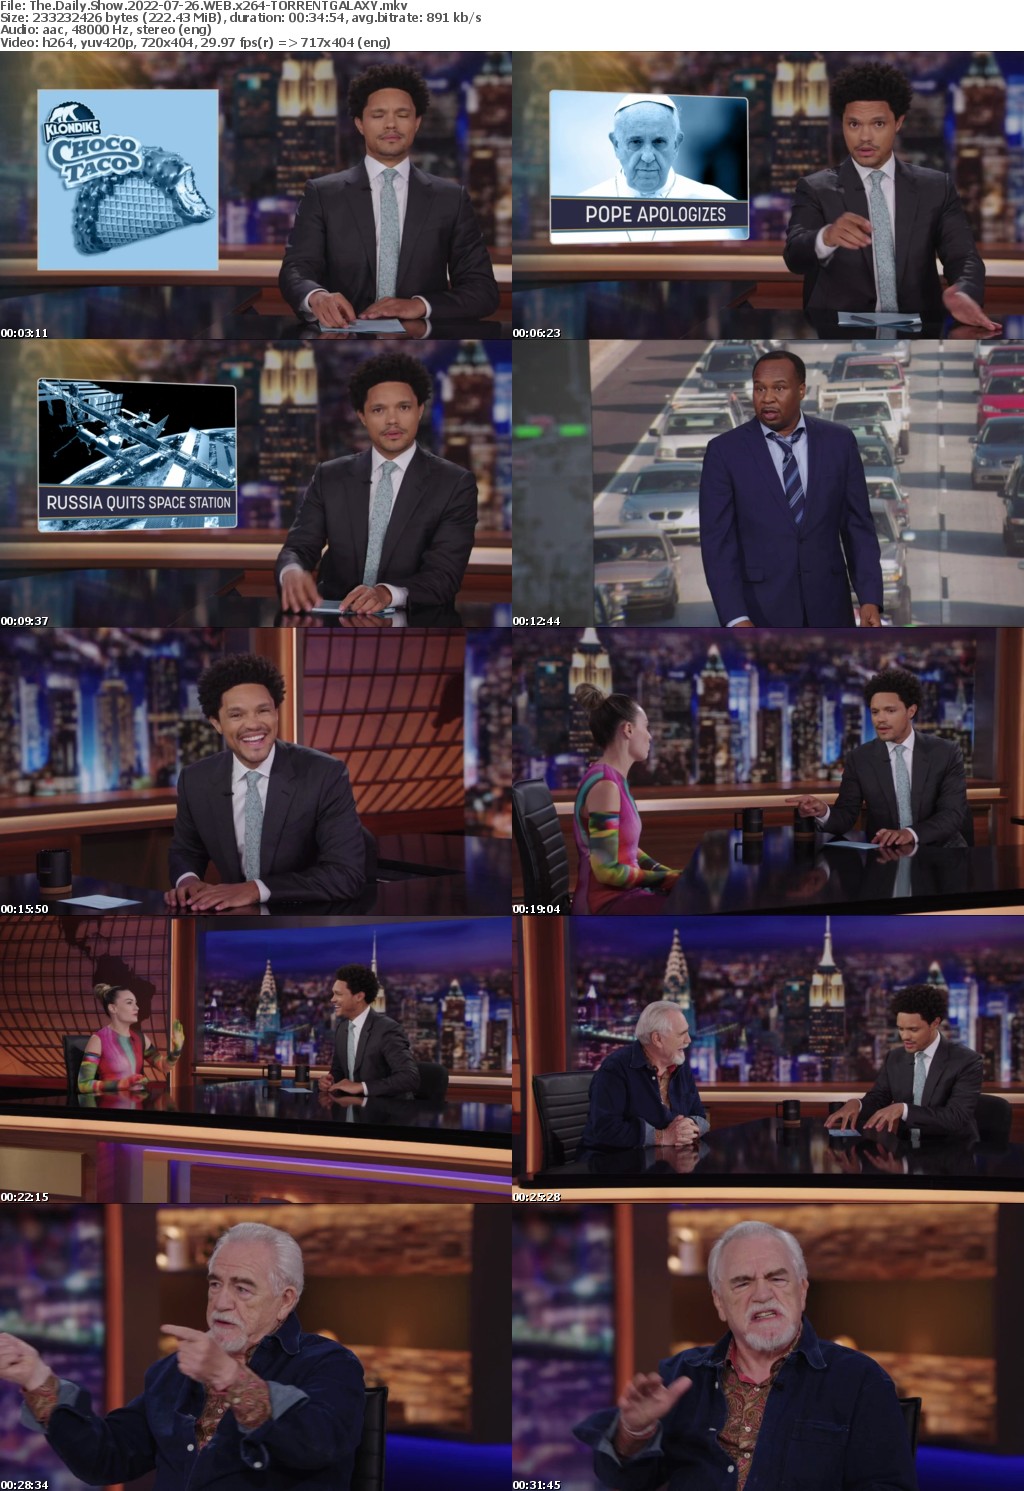 The Daily Show 2022-07-26 WEB x264-GALAXY